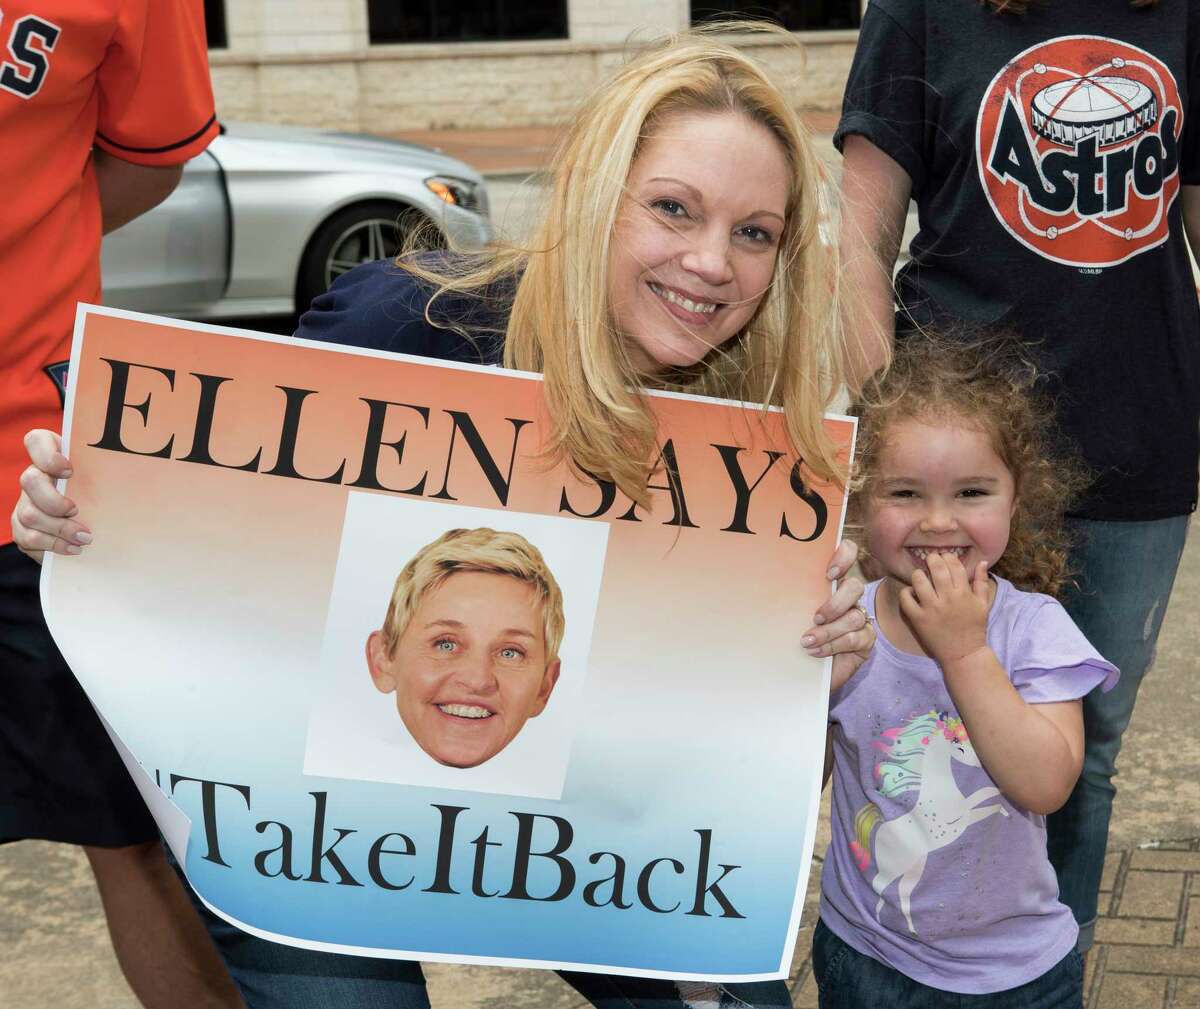 Houston Astros fans line up for a chance to appear on "The Ellen DeGeneres Show” in a segment being taped outside Minute Maid Park on Wednesday, May 22, 2019, in Houston.